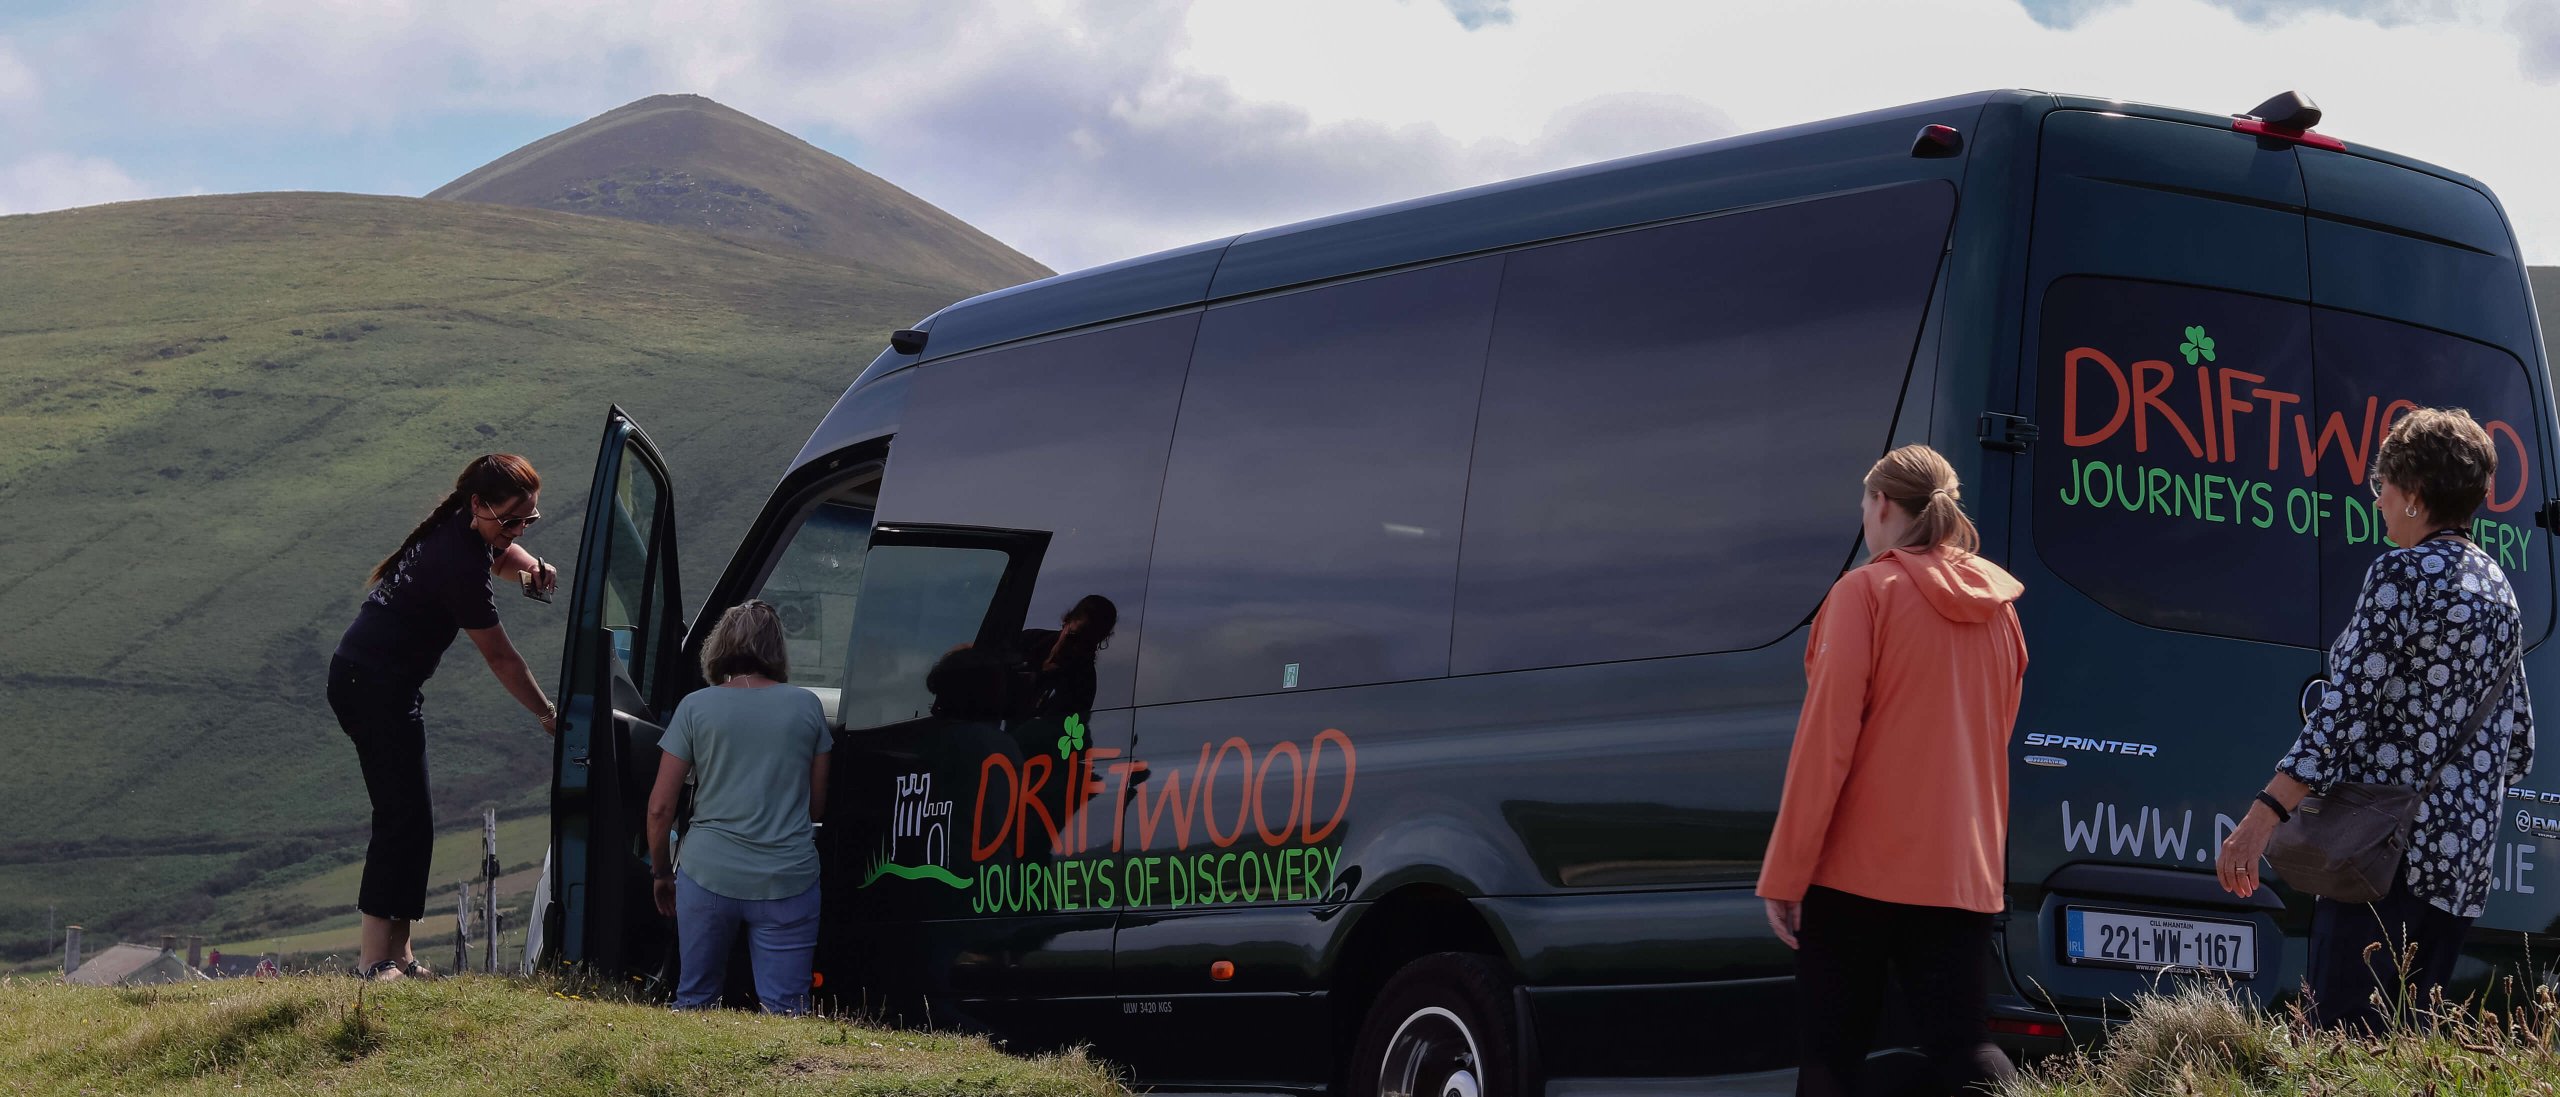 Driftwood group and guide on a tour of the Wild Atlantic Way in Ireland